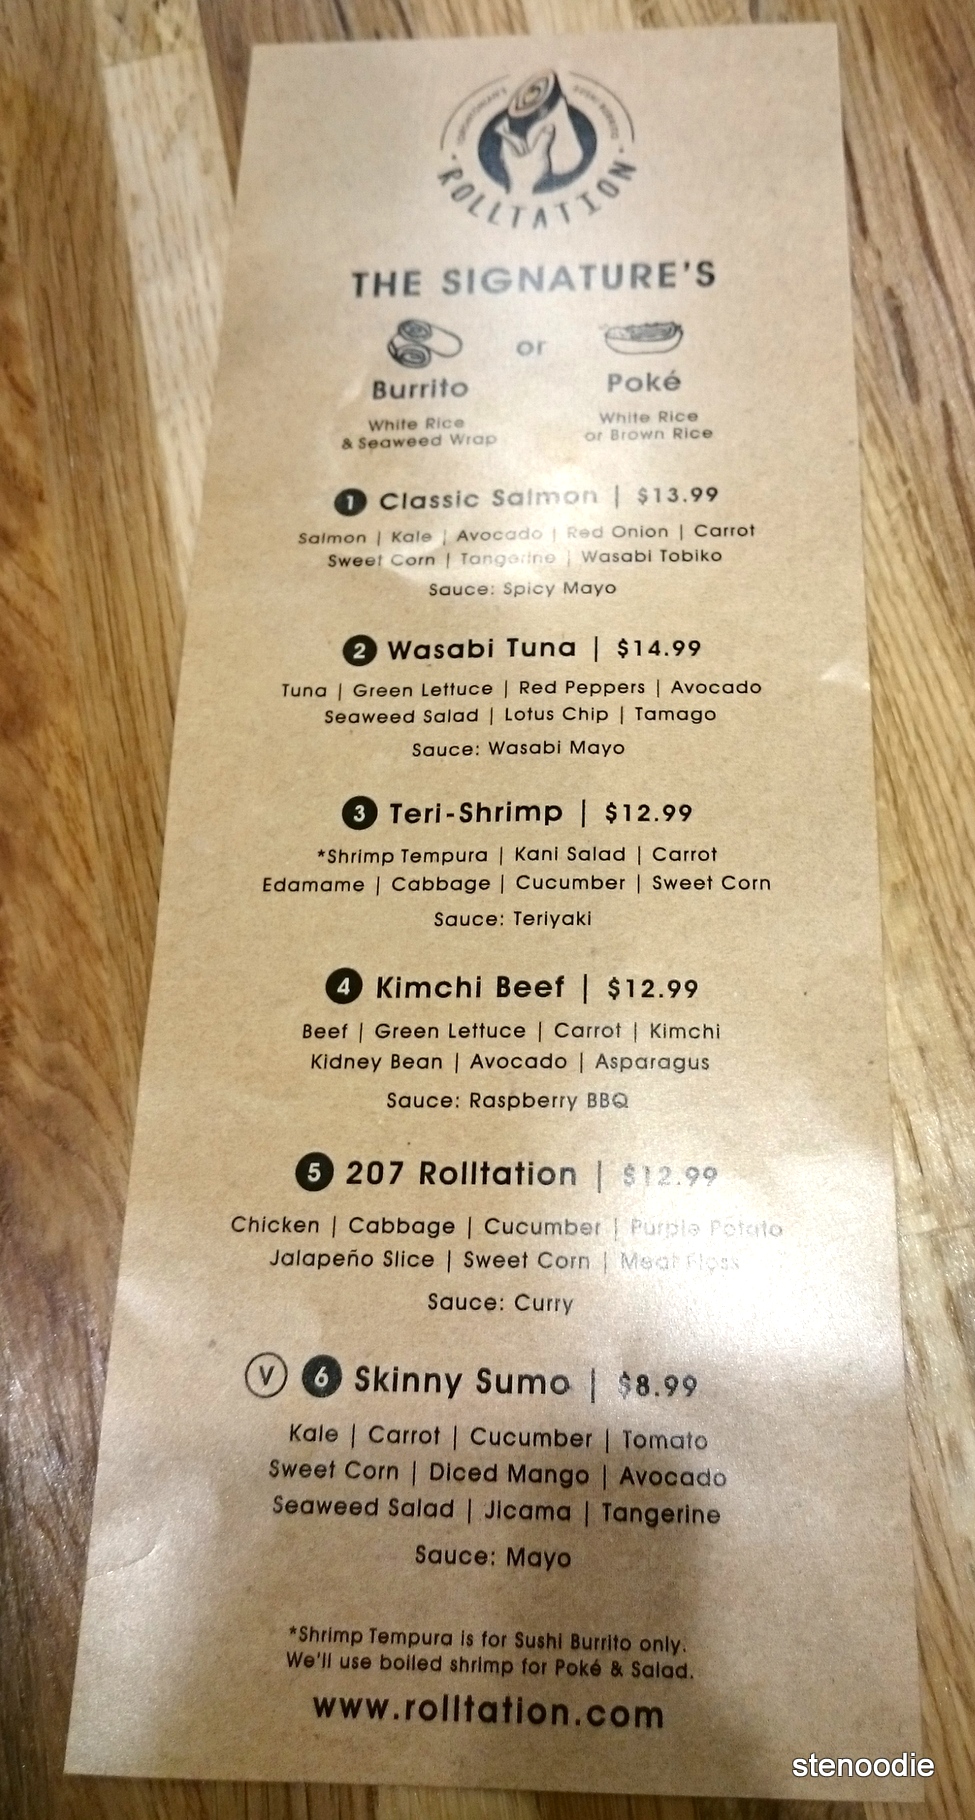  Rolltation menu and prices